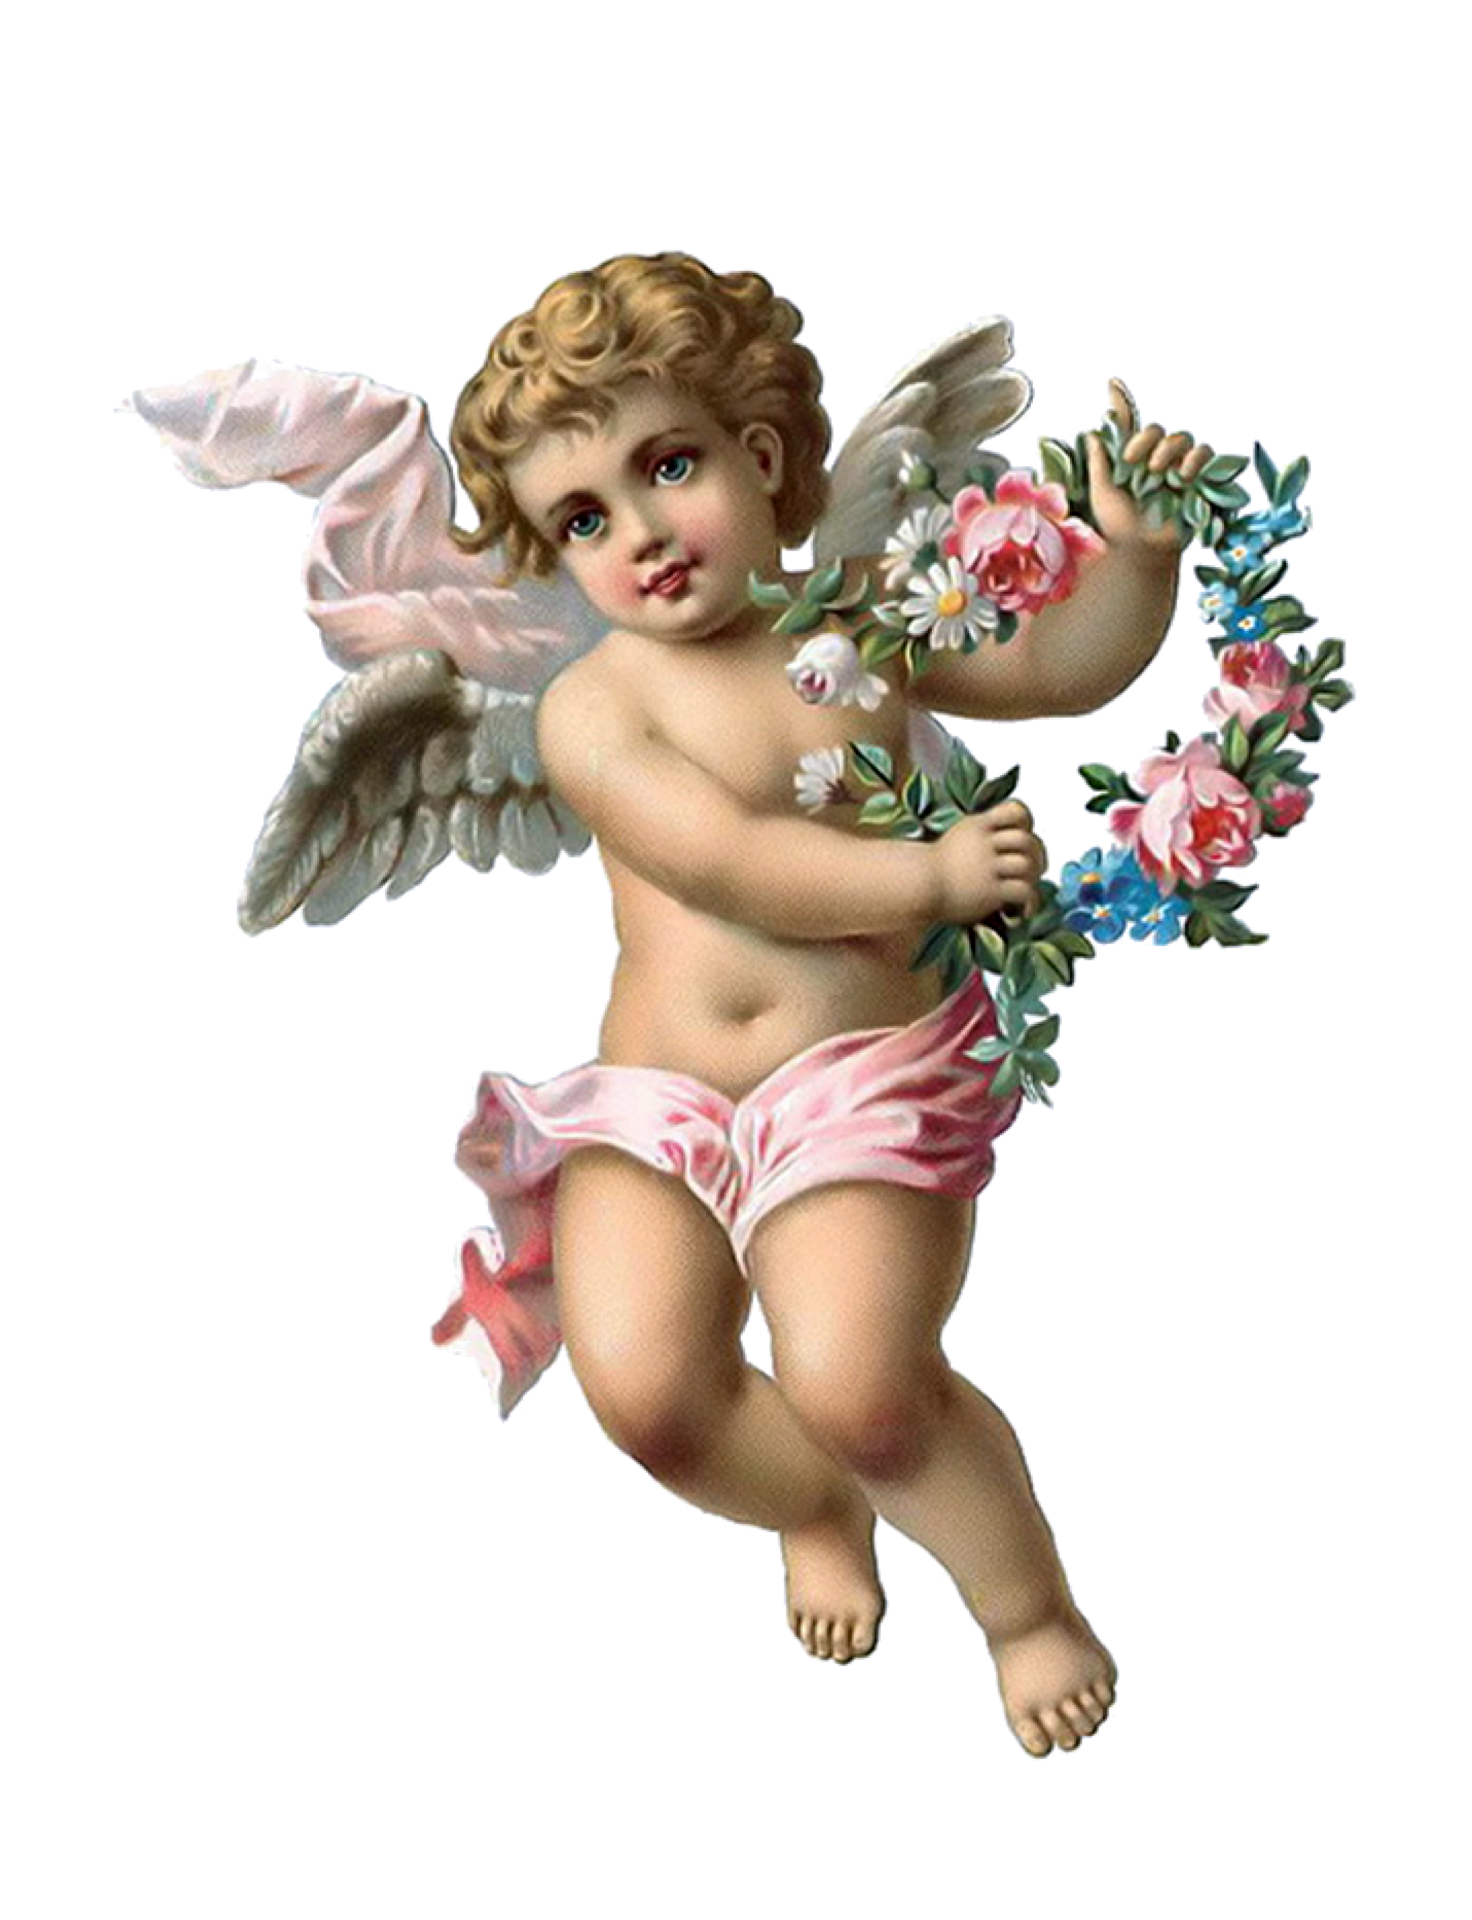 Clipart angel Christmas Christmas angel child vintage art hand painted illustration drawing decorative sticker with transparent background png consists of element of a public domain image